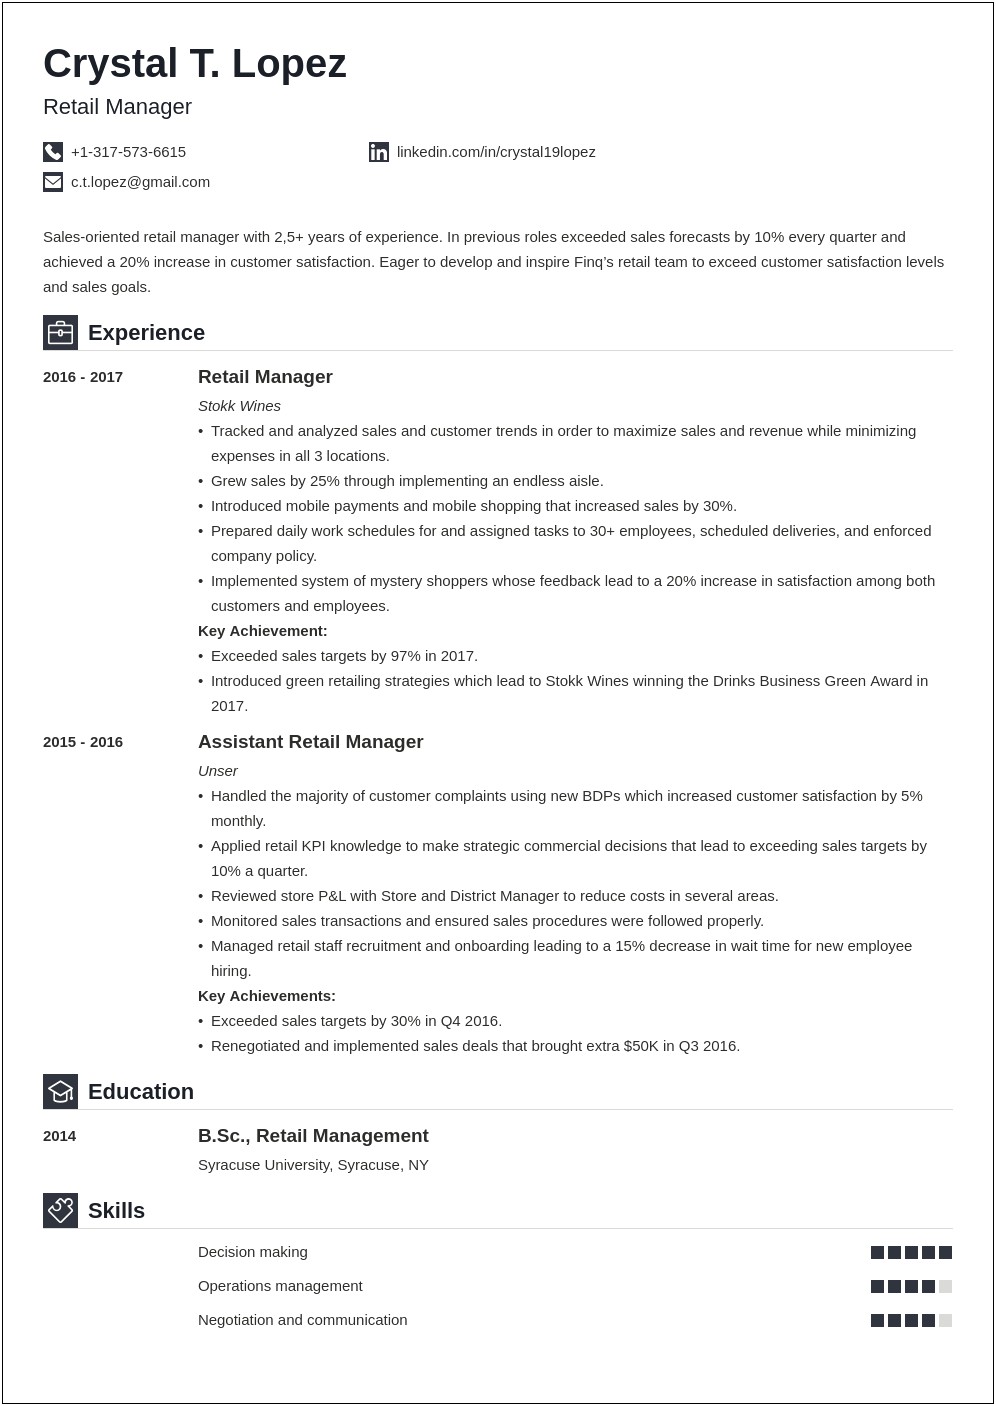 Resume Objective For Experienced Retail Manager